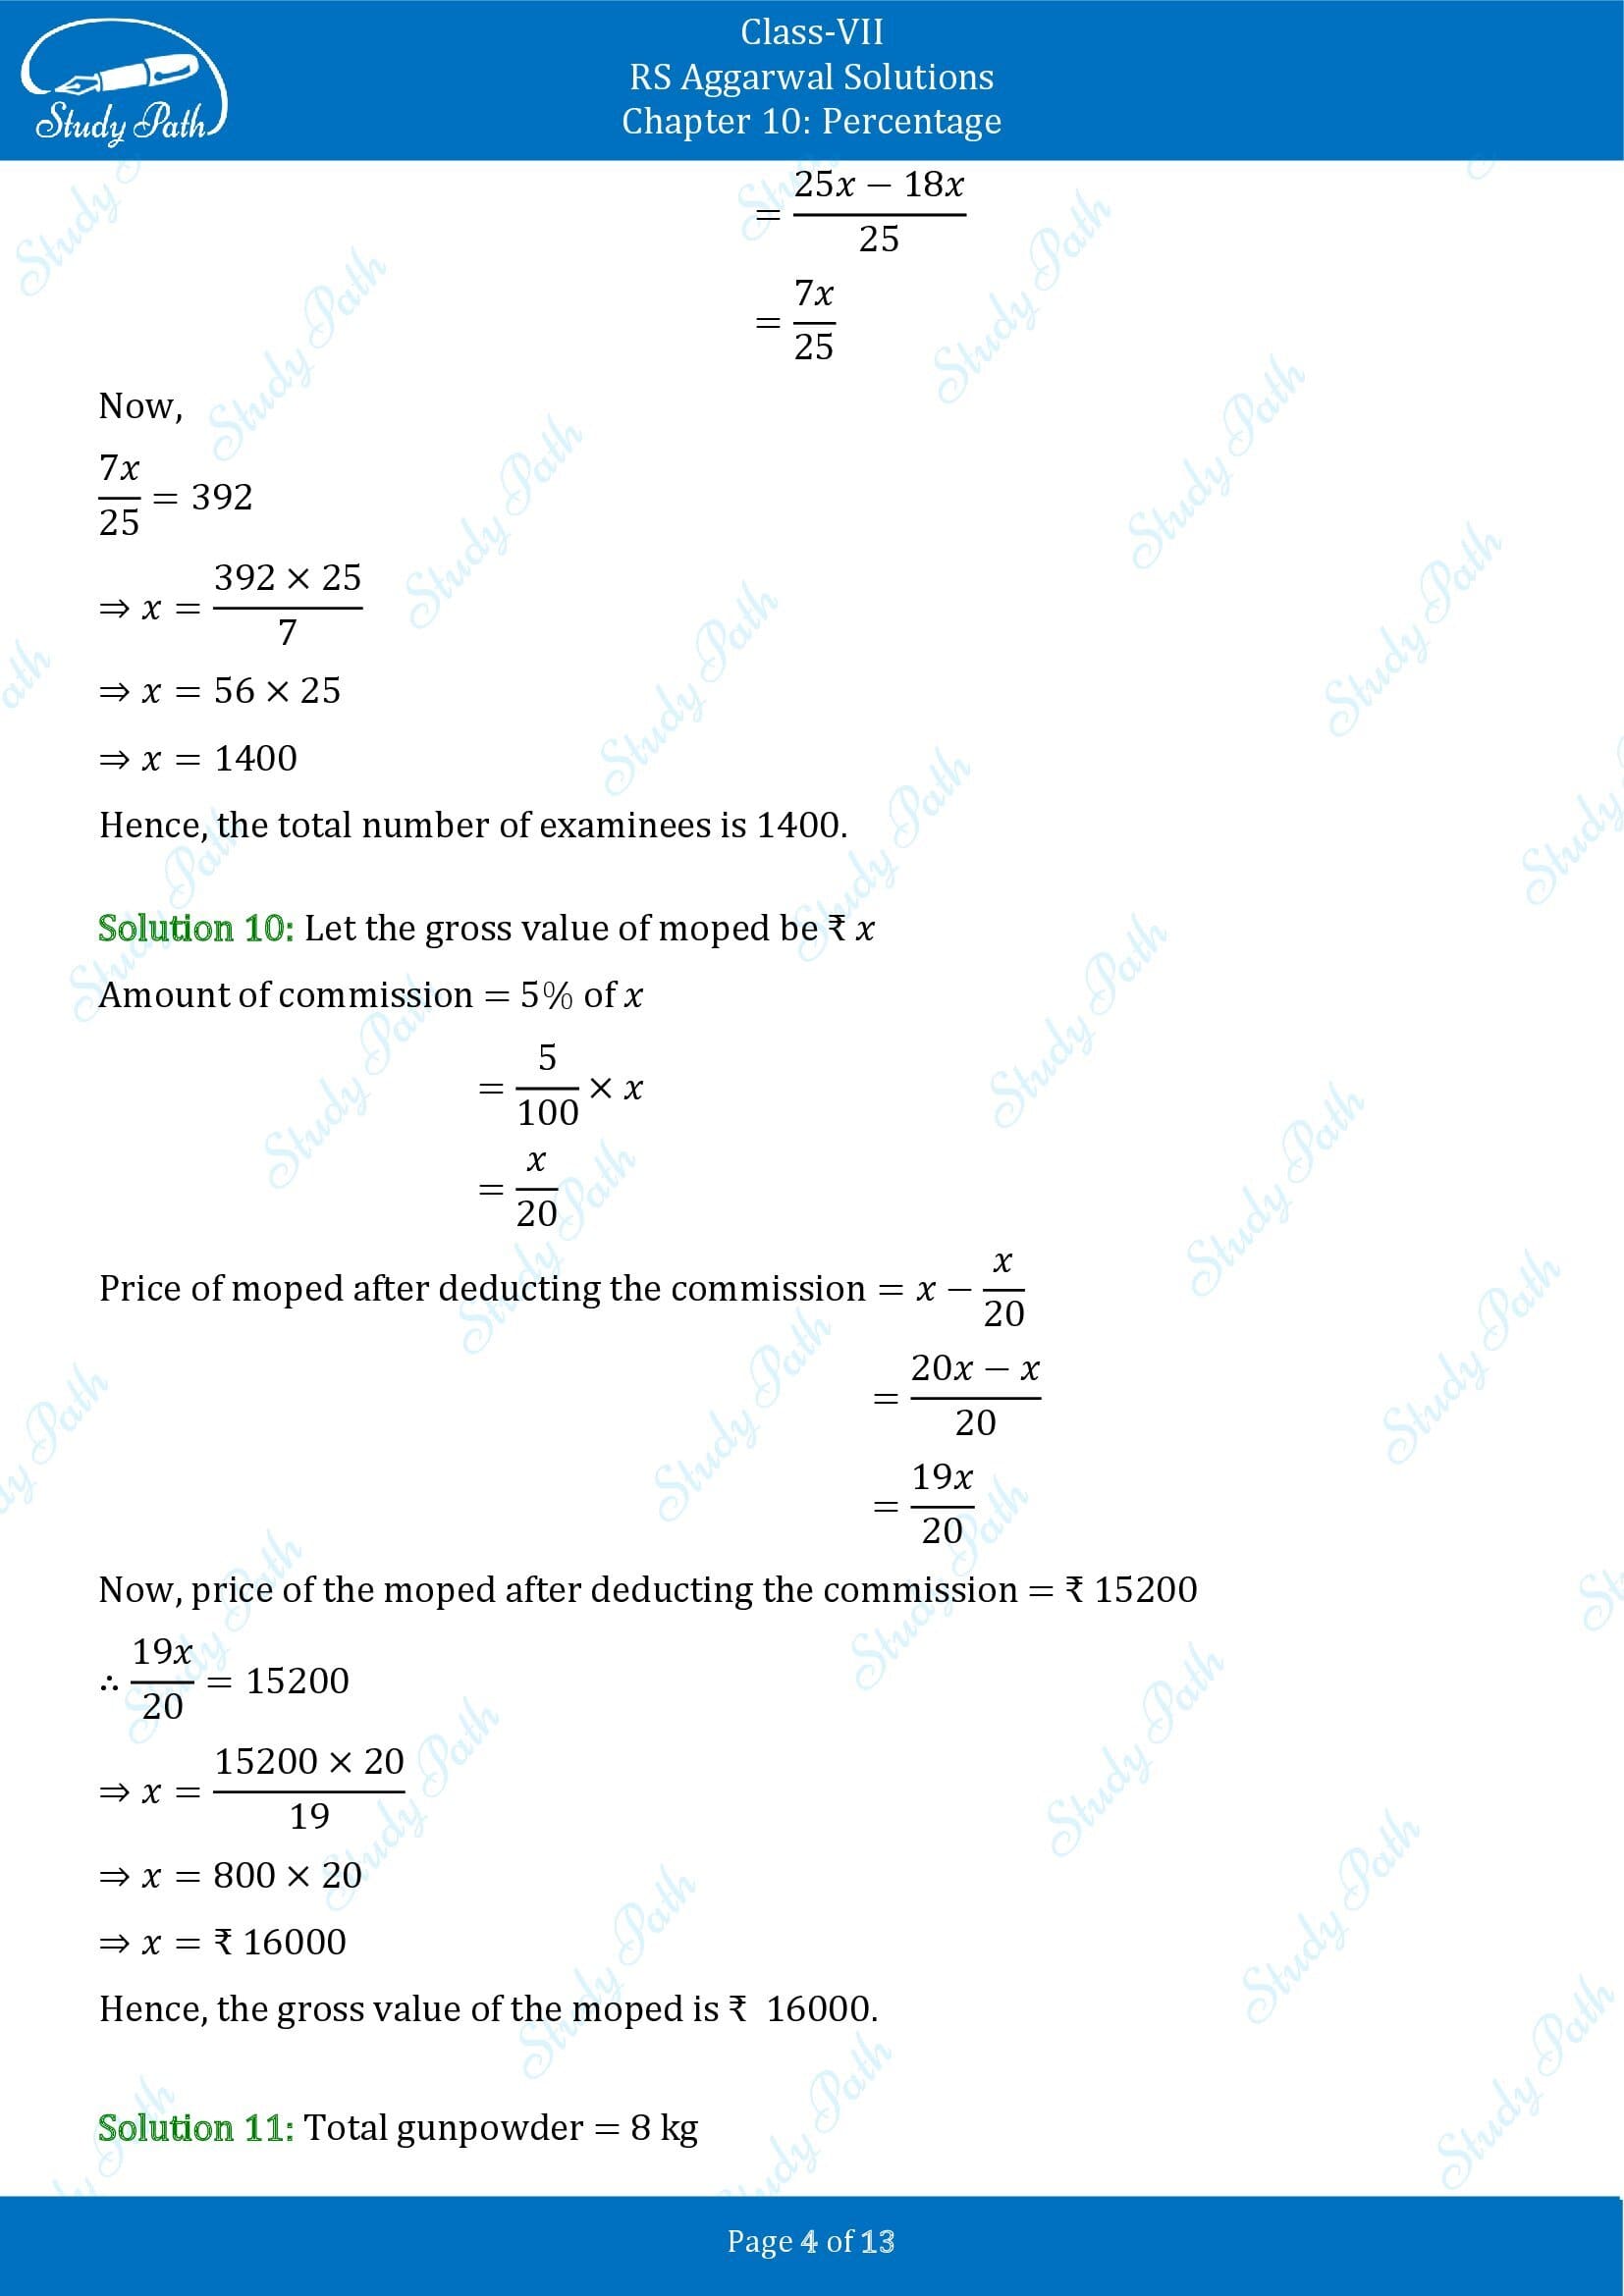 RS Aggarwal Solutions Class 7 Chapter 10 Percentage Exercise 10B 00004